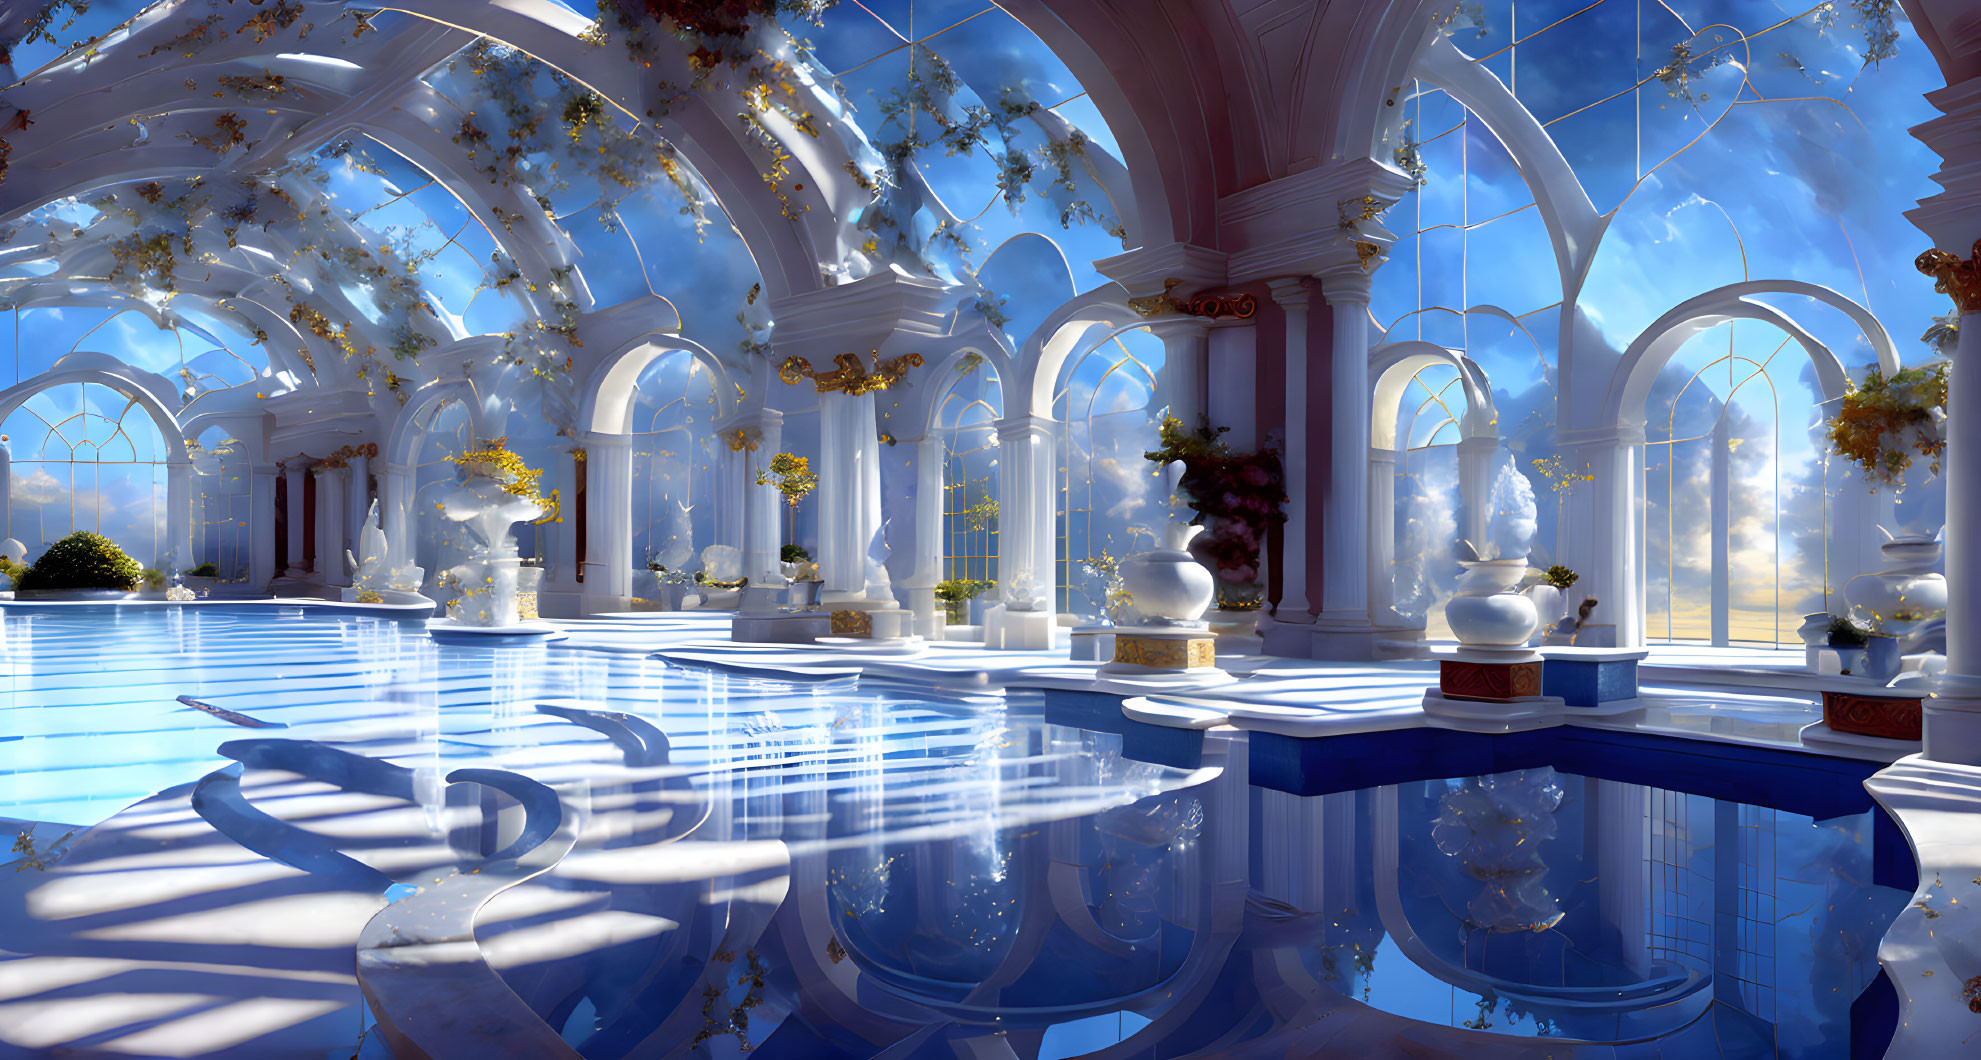 Grand Hall with Arches, Marble Columns, Plants, Sunbeams, Glossy Blue Floor